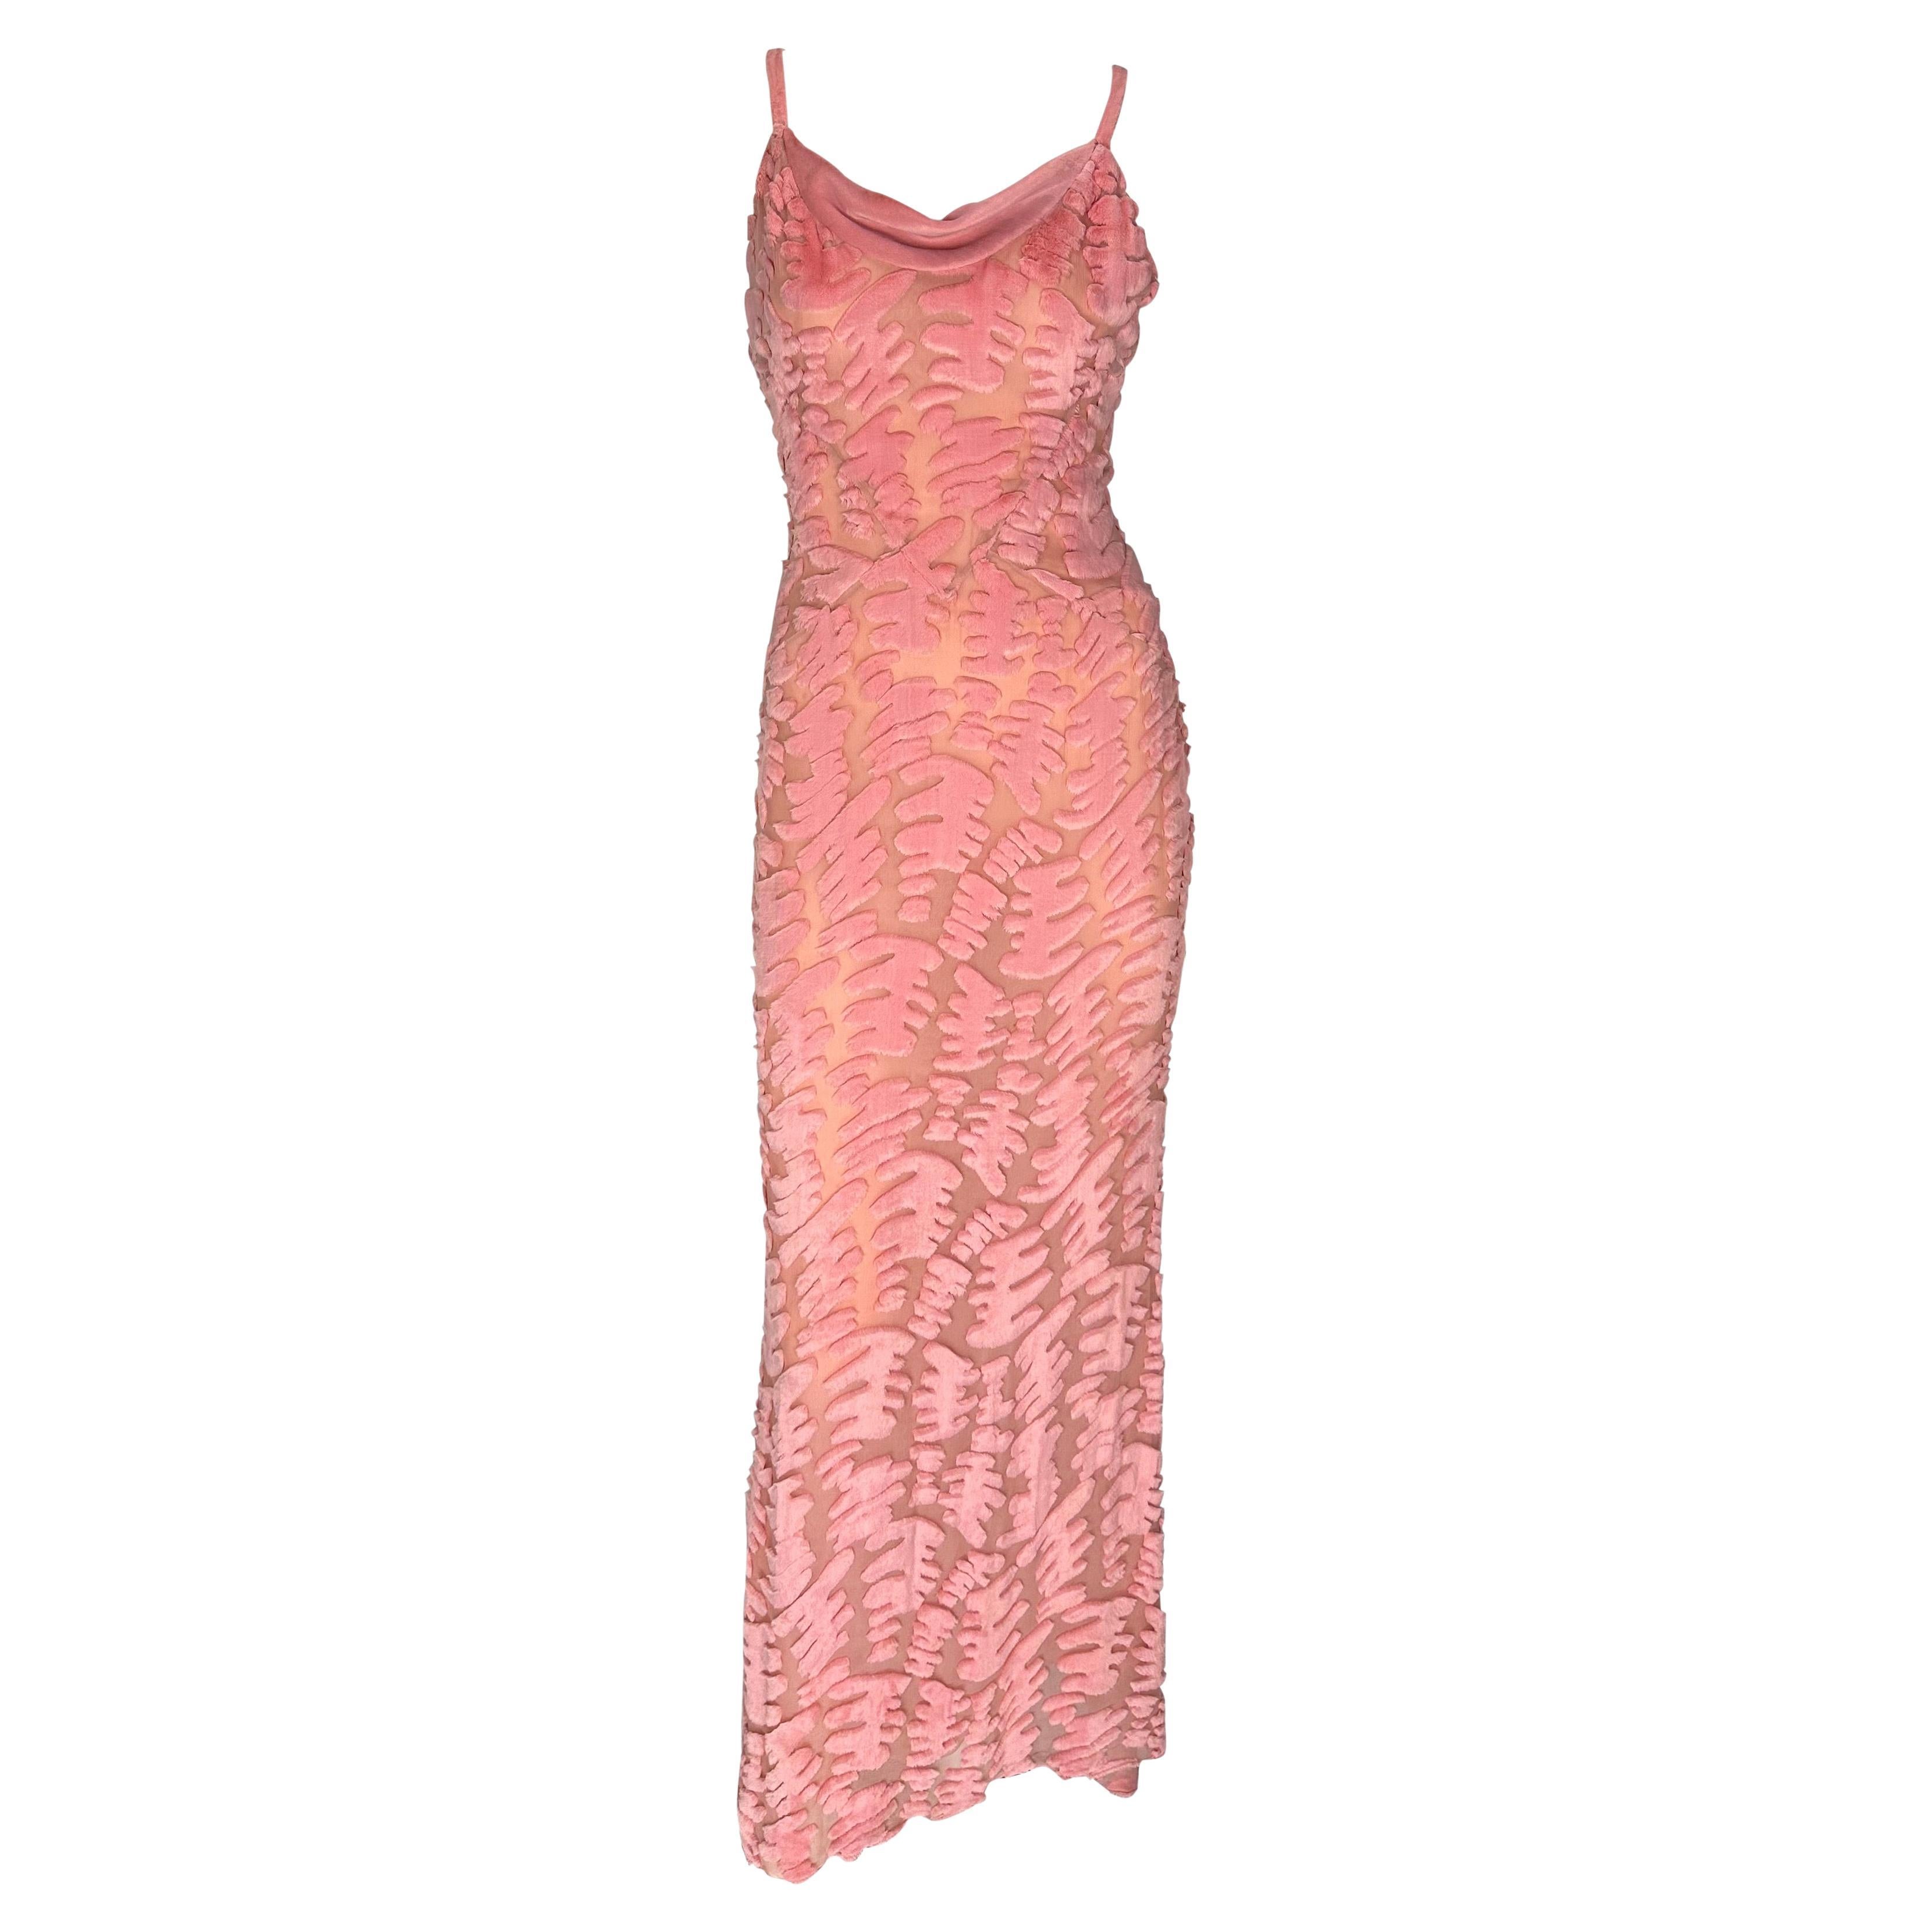 F/W 1997 Chloé by Karl Lagerfeld Pink Sheer Chiffon Abstract Chenille Gown For Sale